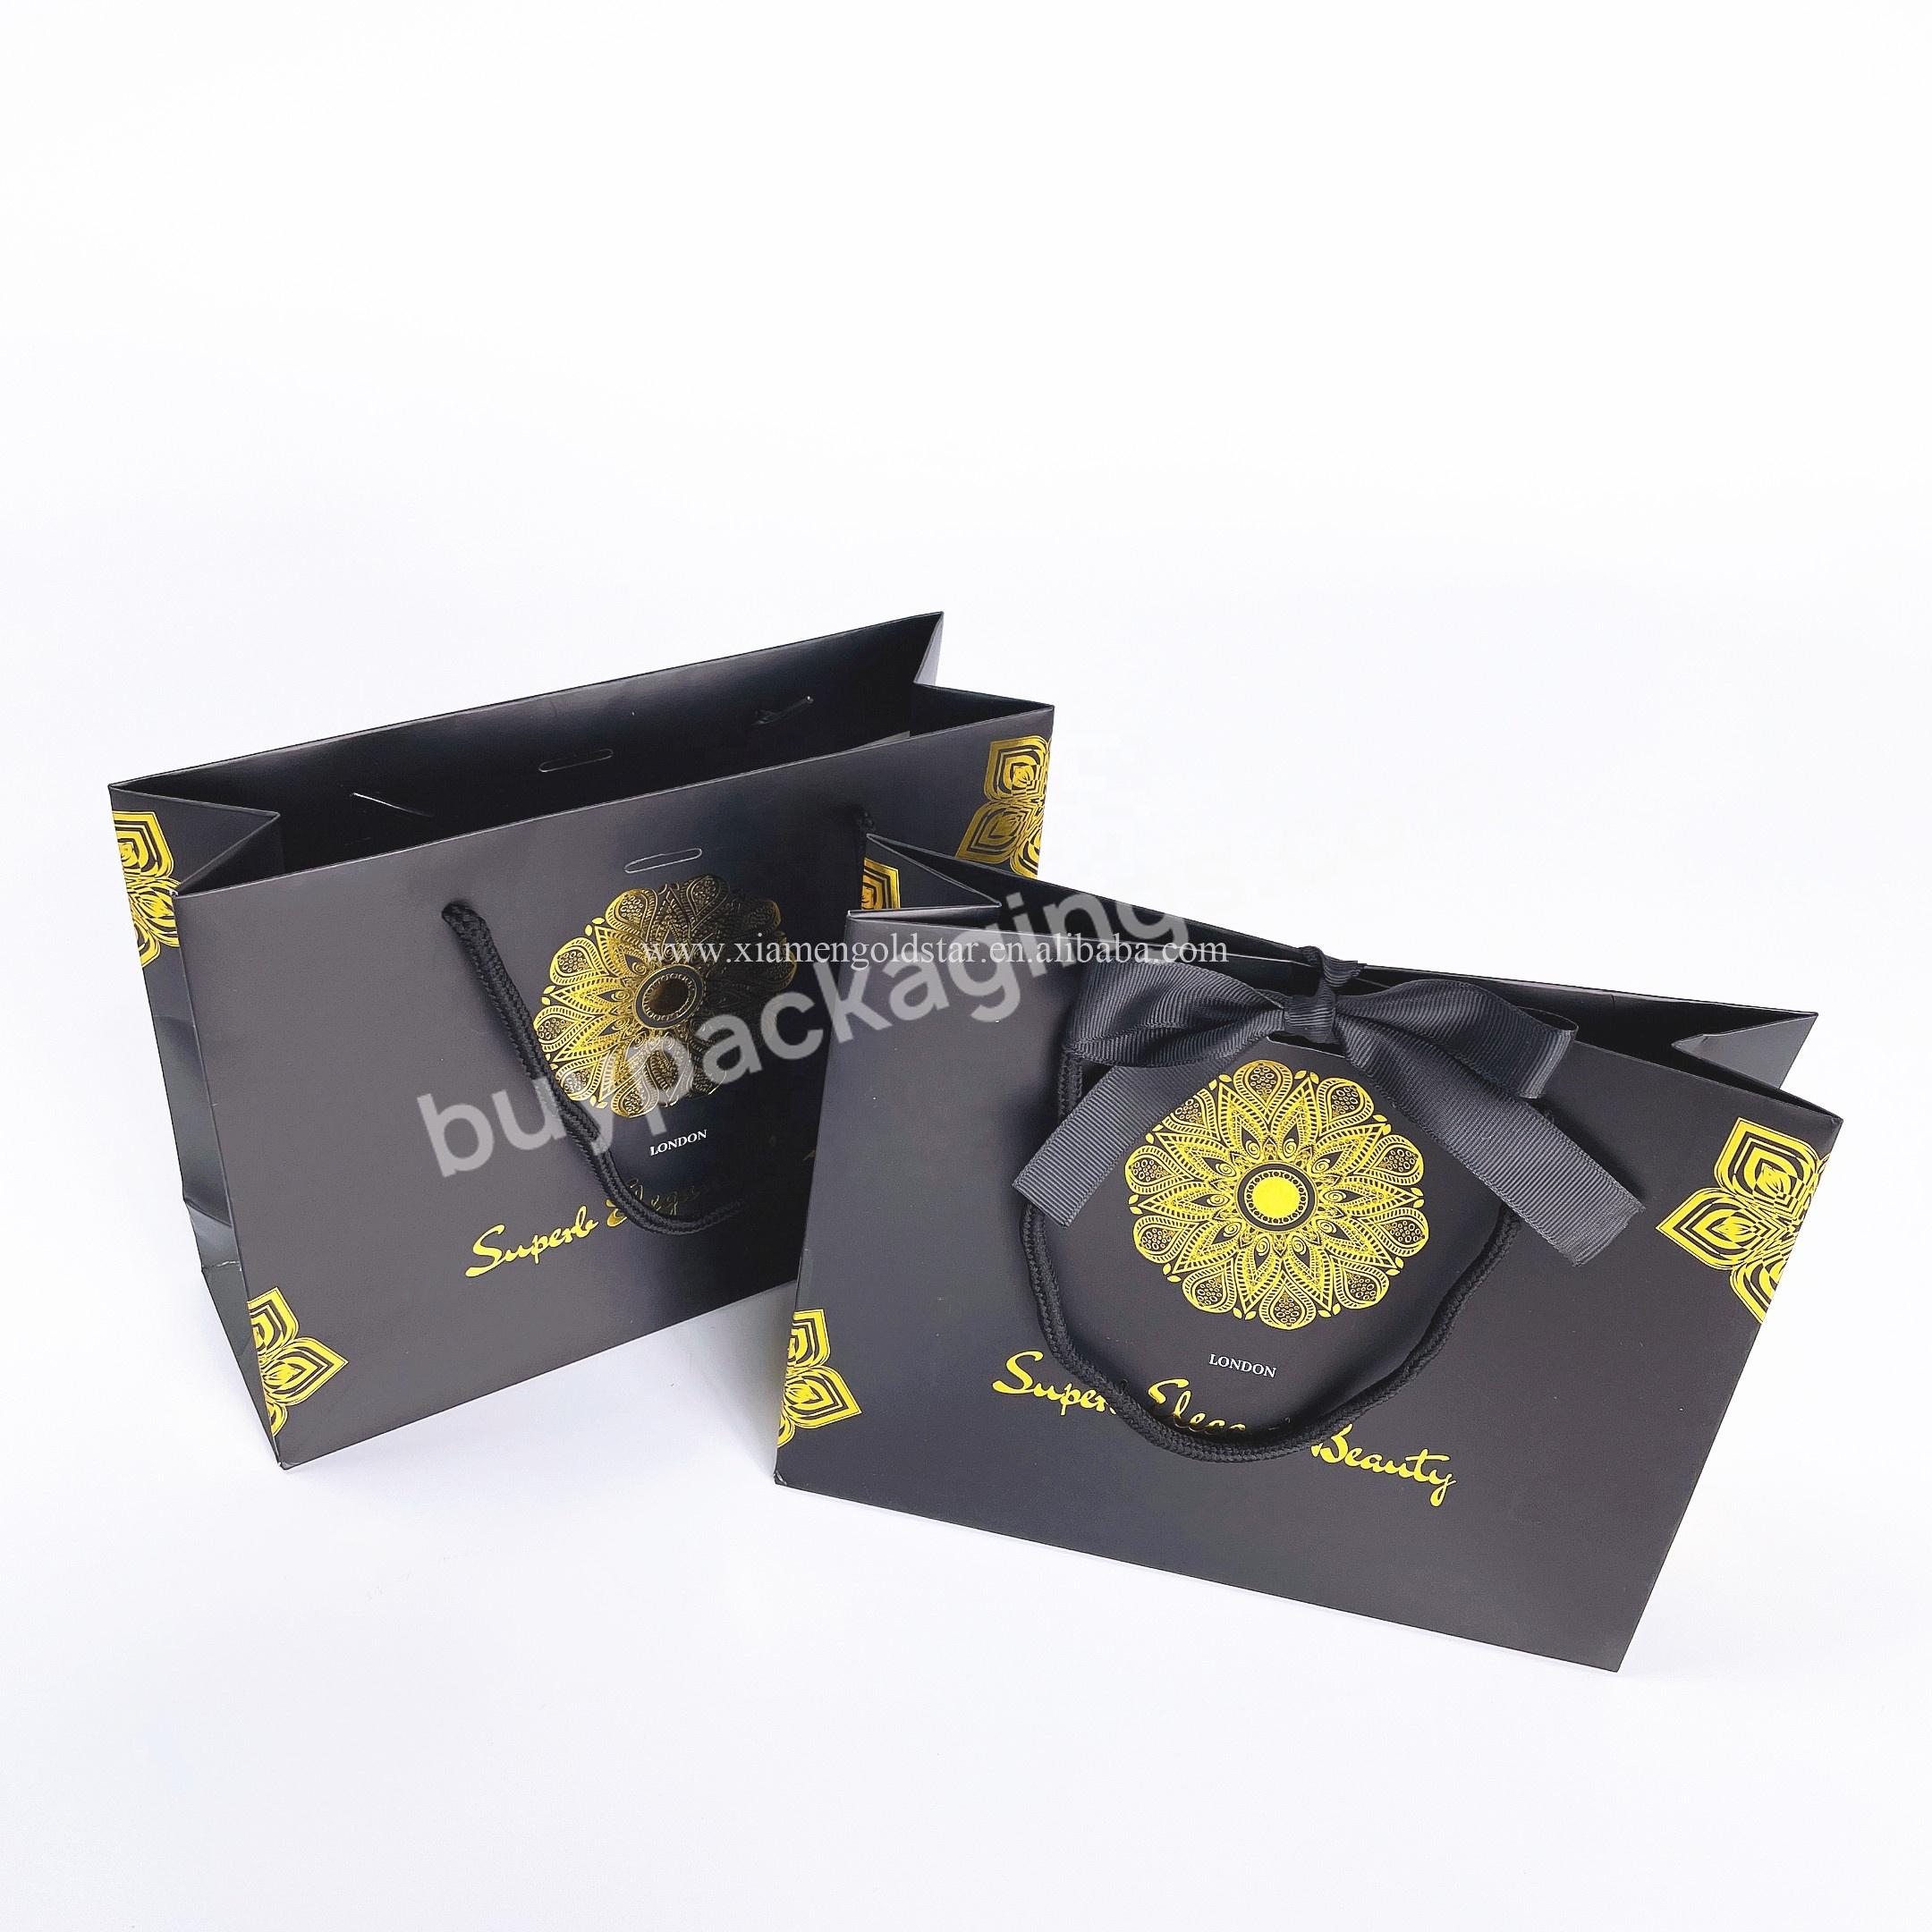 Luxury Paper Bags Branded Shoes Packing Bags Paper Bags For Shoes Packing